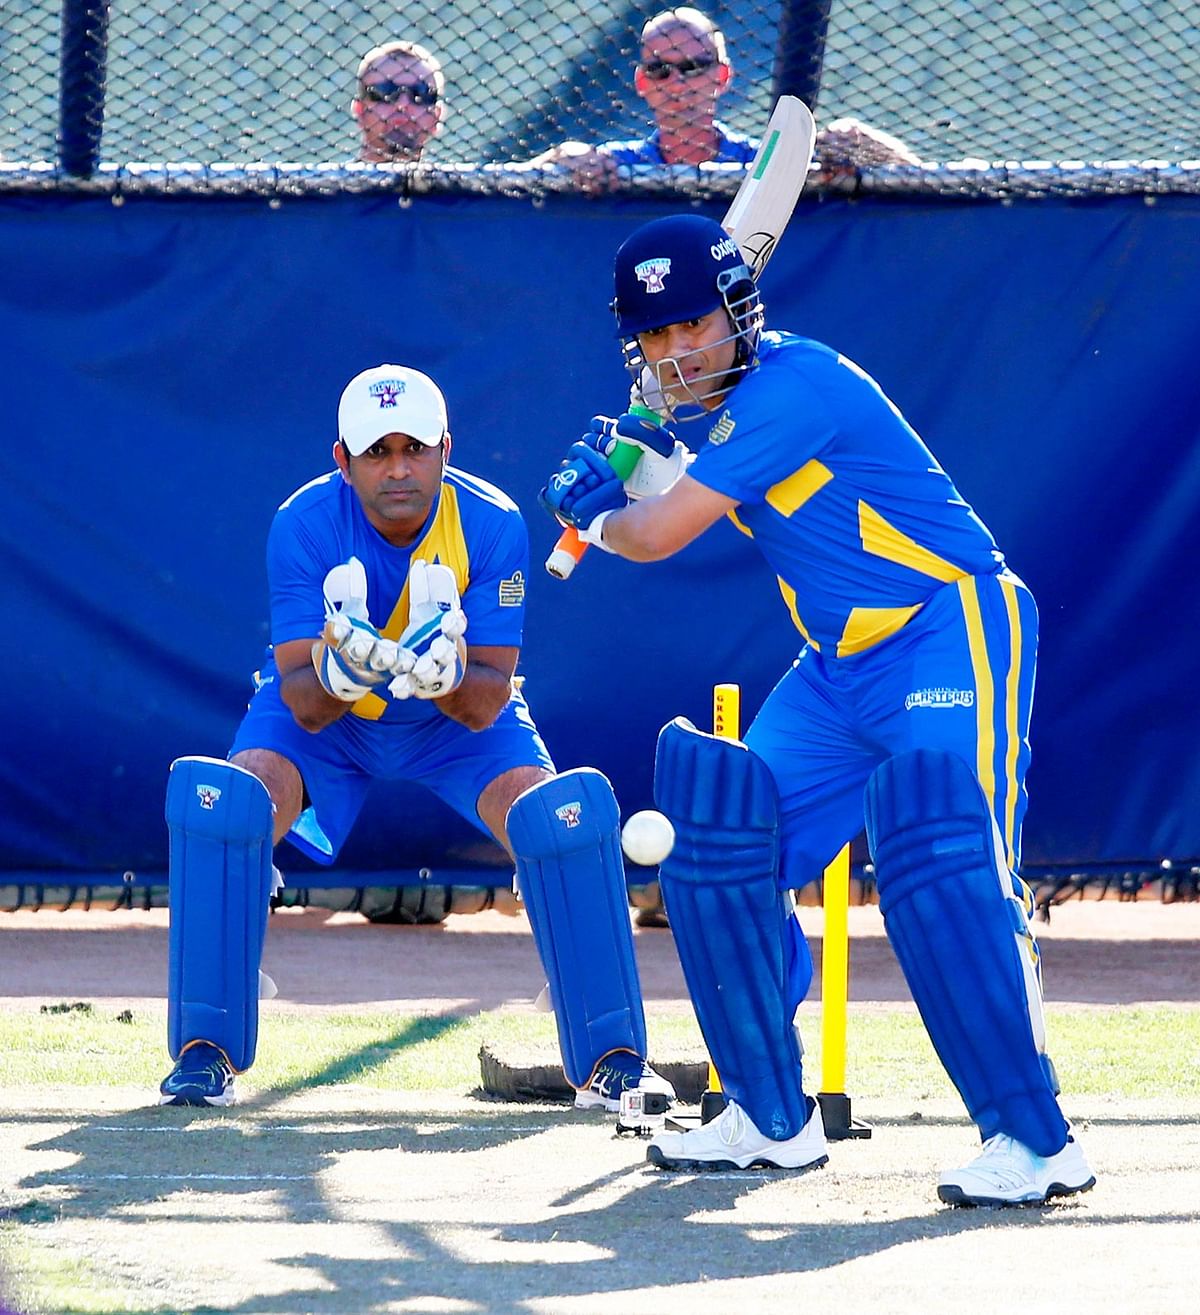 In a thrilling encounter, Sachin’s Blasters lost the Cricket All Stars series 3-0 to Warne’s Warriors. 